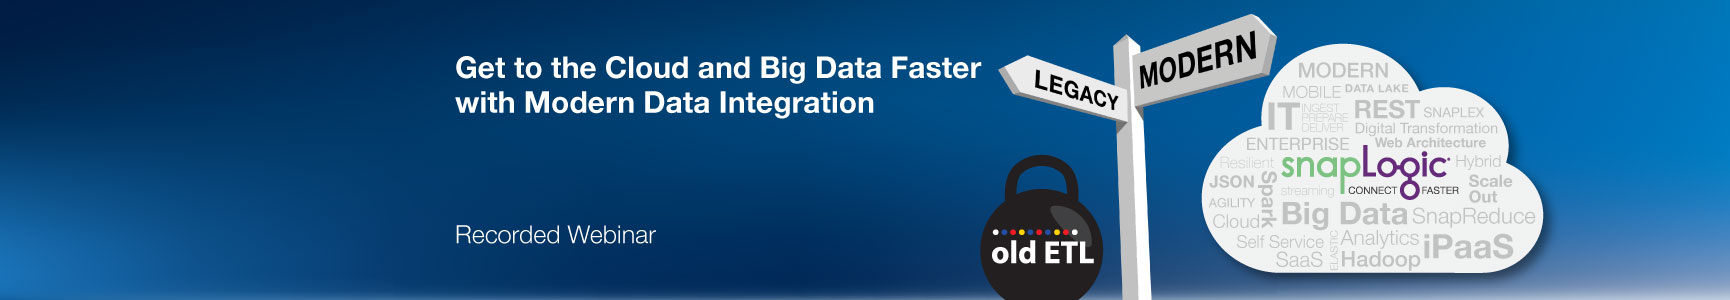 Webinar: Get to the Cloud and Big Data Faster